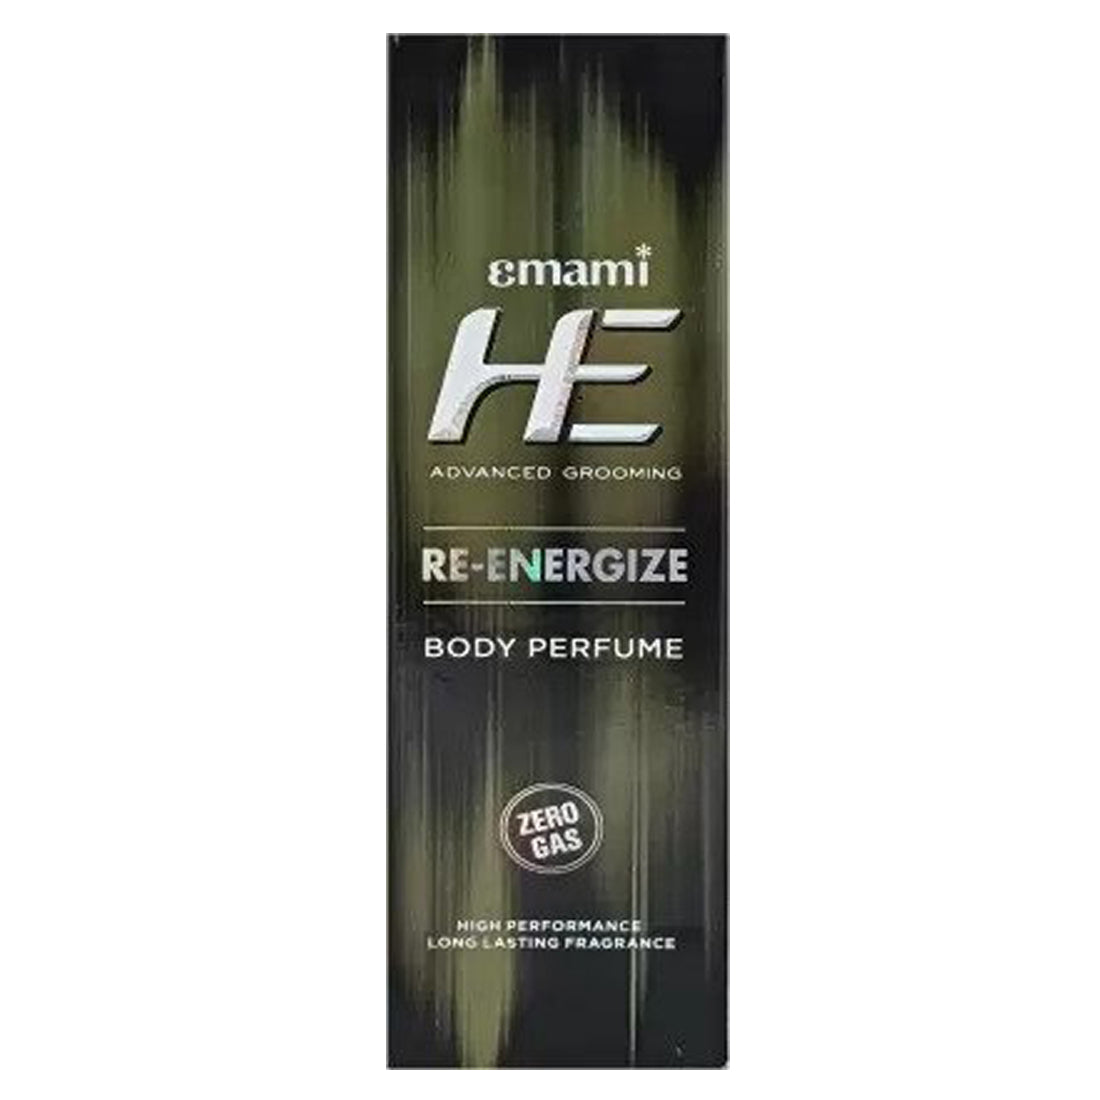 Emami He Re-Energize Body Perfumed -120ml